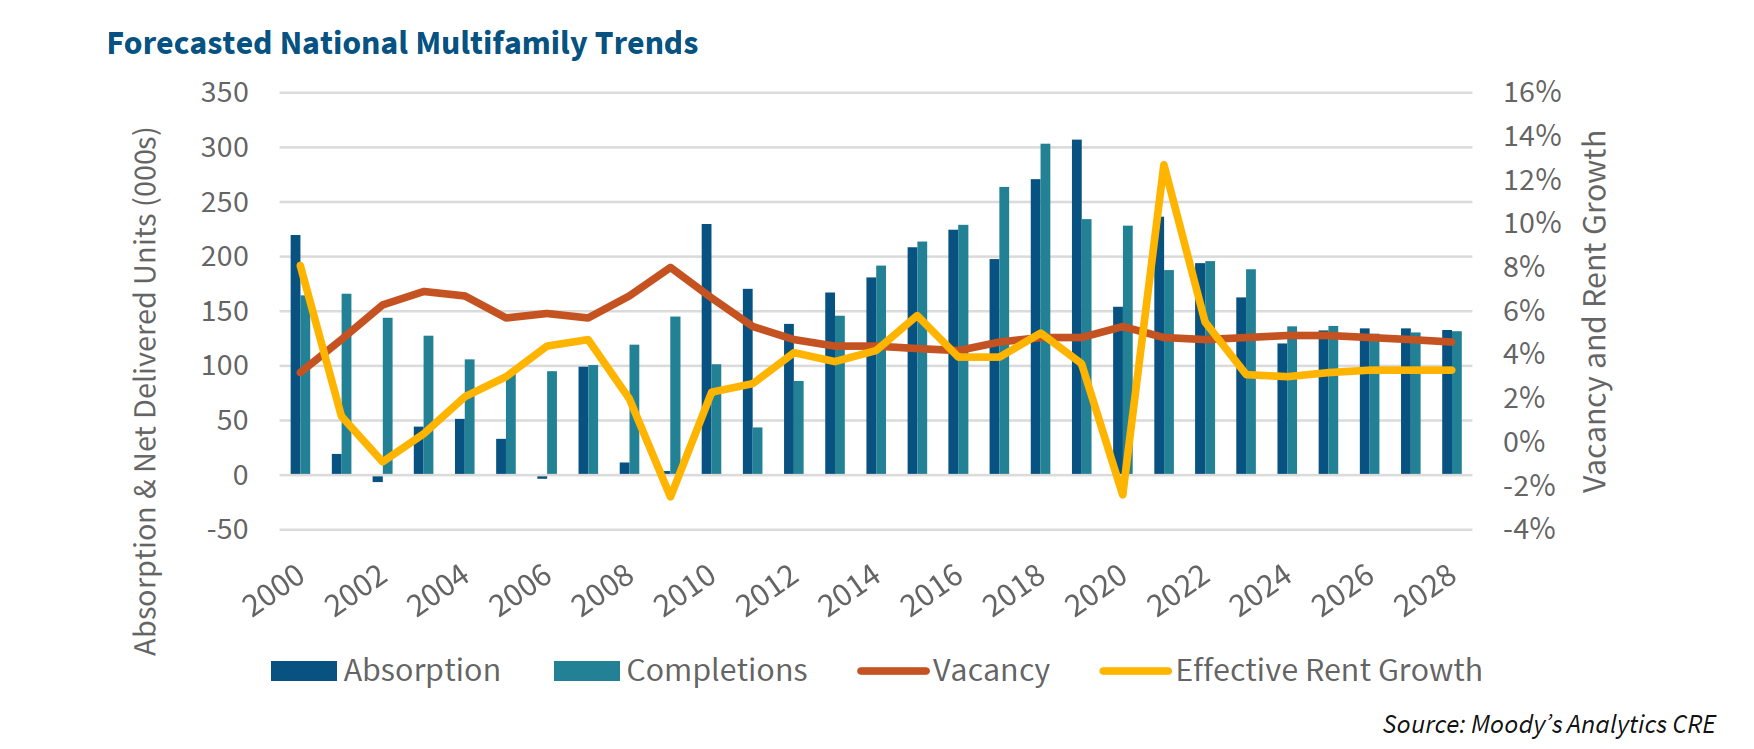 Forecasted National Multifamily Trends